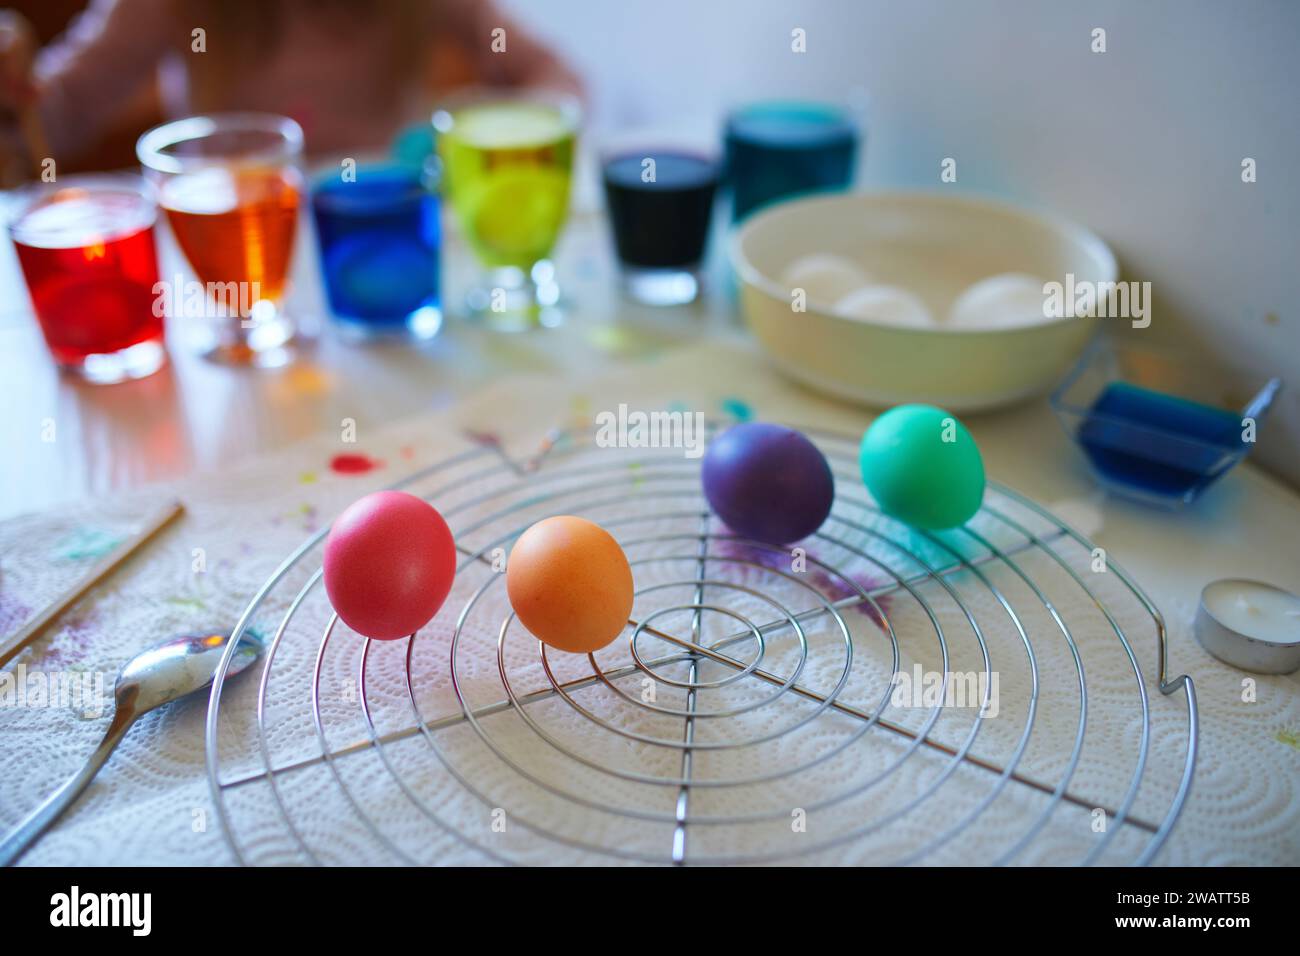 Using food coloring to dye Easter eggs at home. Painting colorful eggs for Easter hunt. Getting ready for Easter celebration. Family traditions. Stock Photo